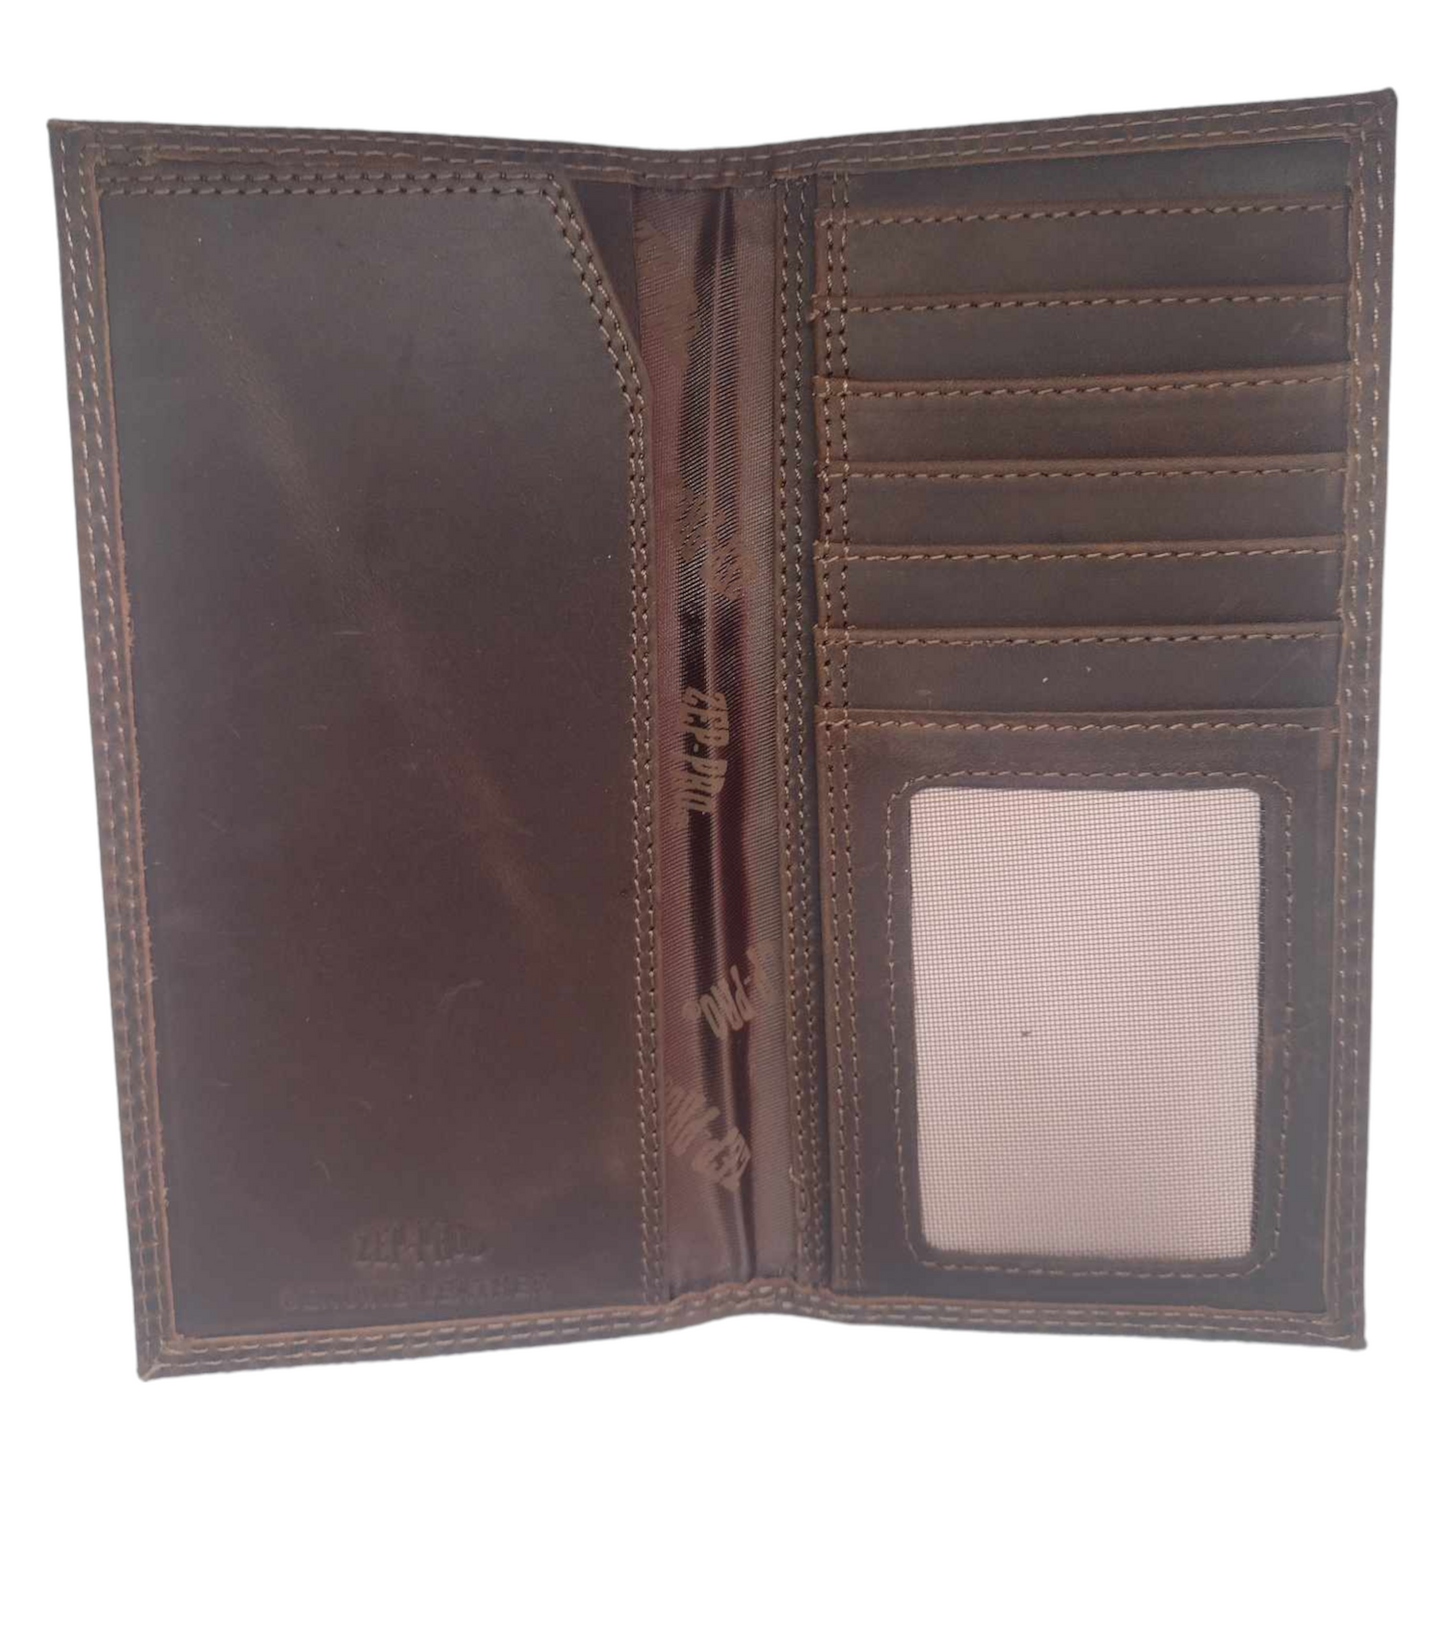 Georgia Bulldogs Brown “Crazy Horse” Leather Tall Wallet